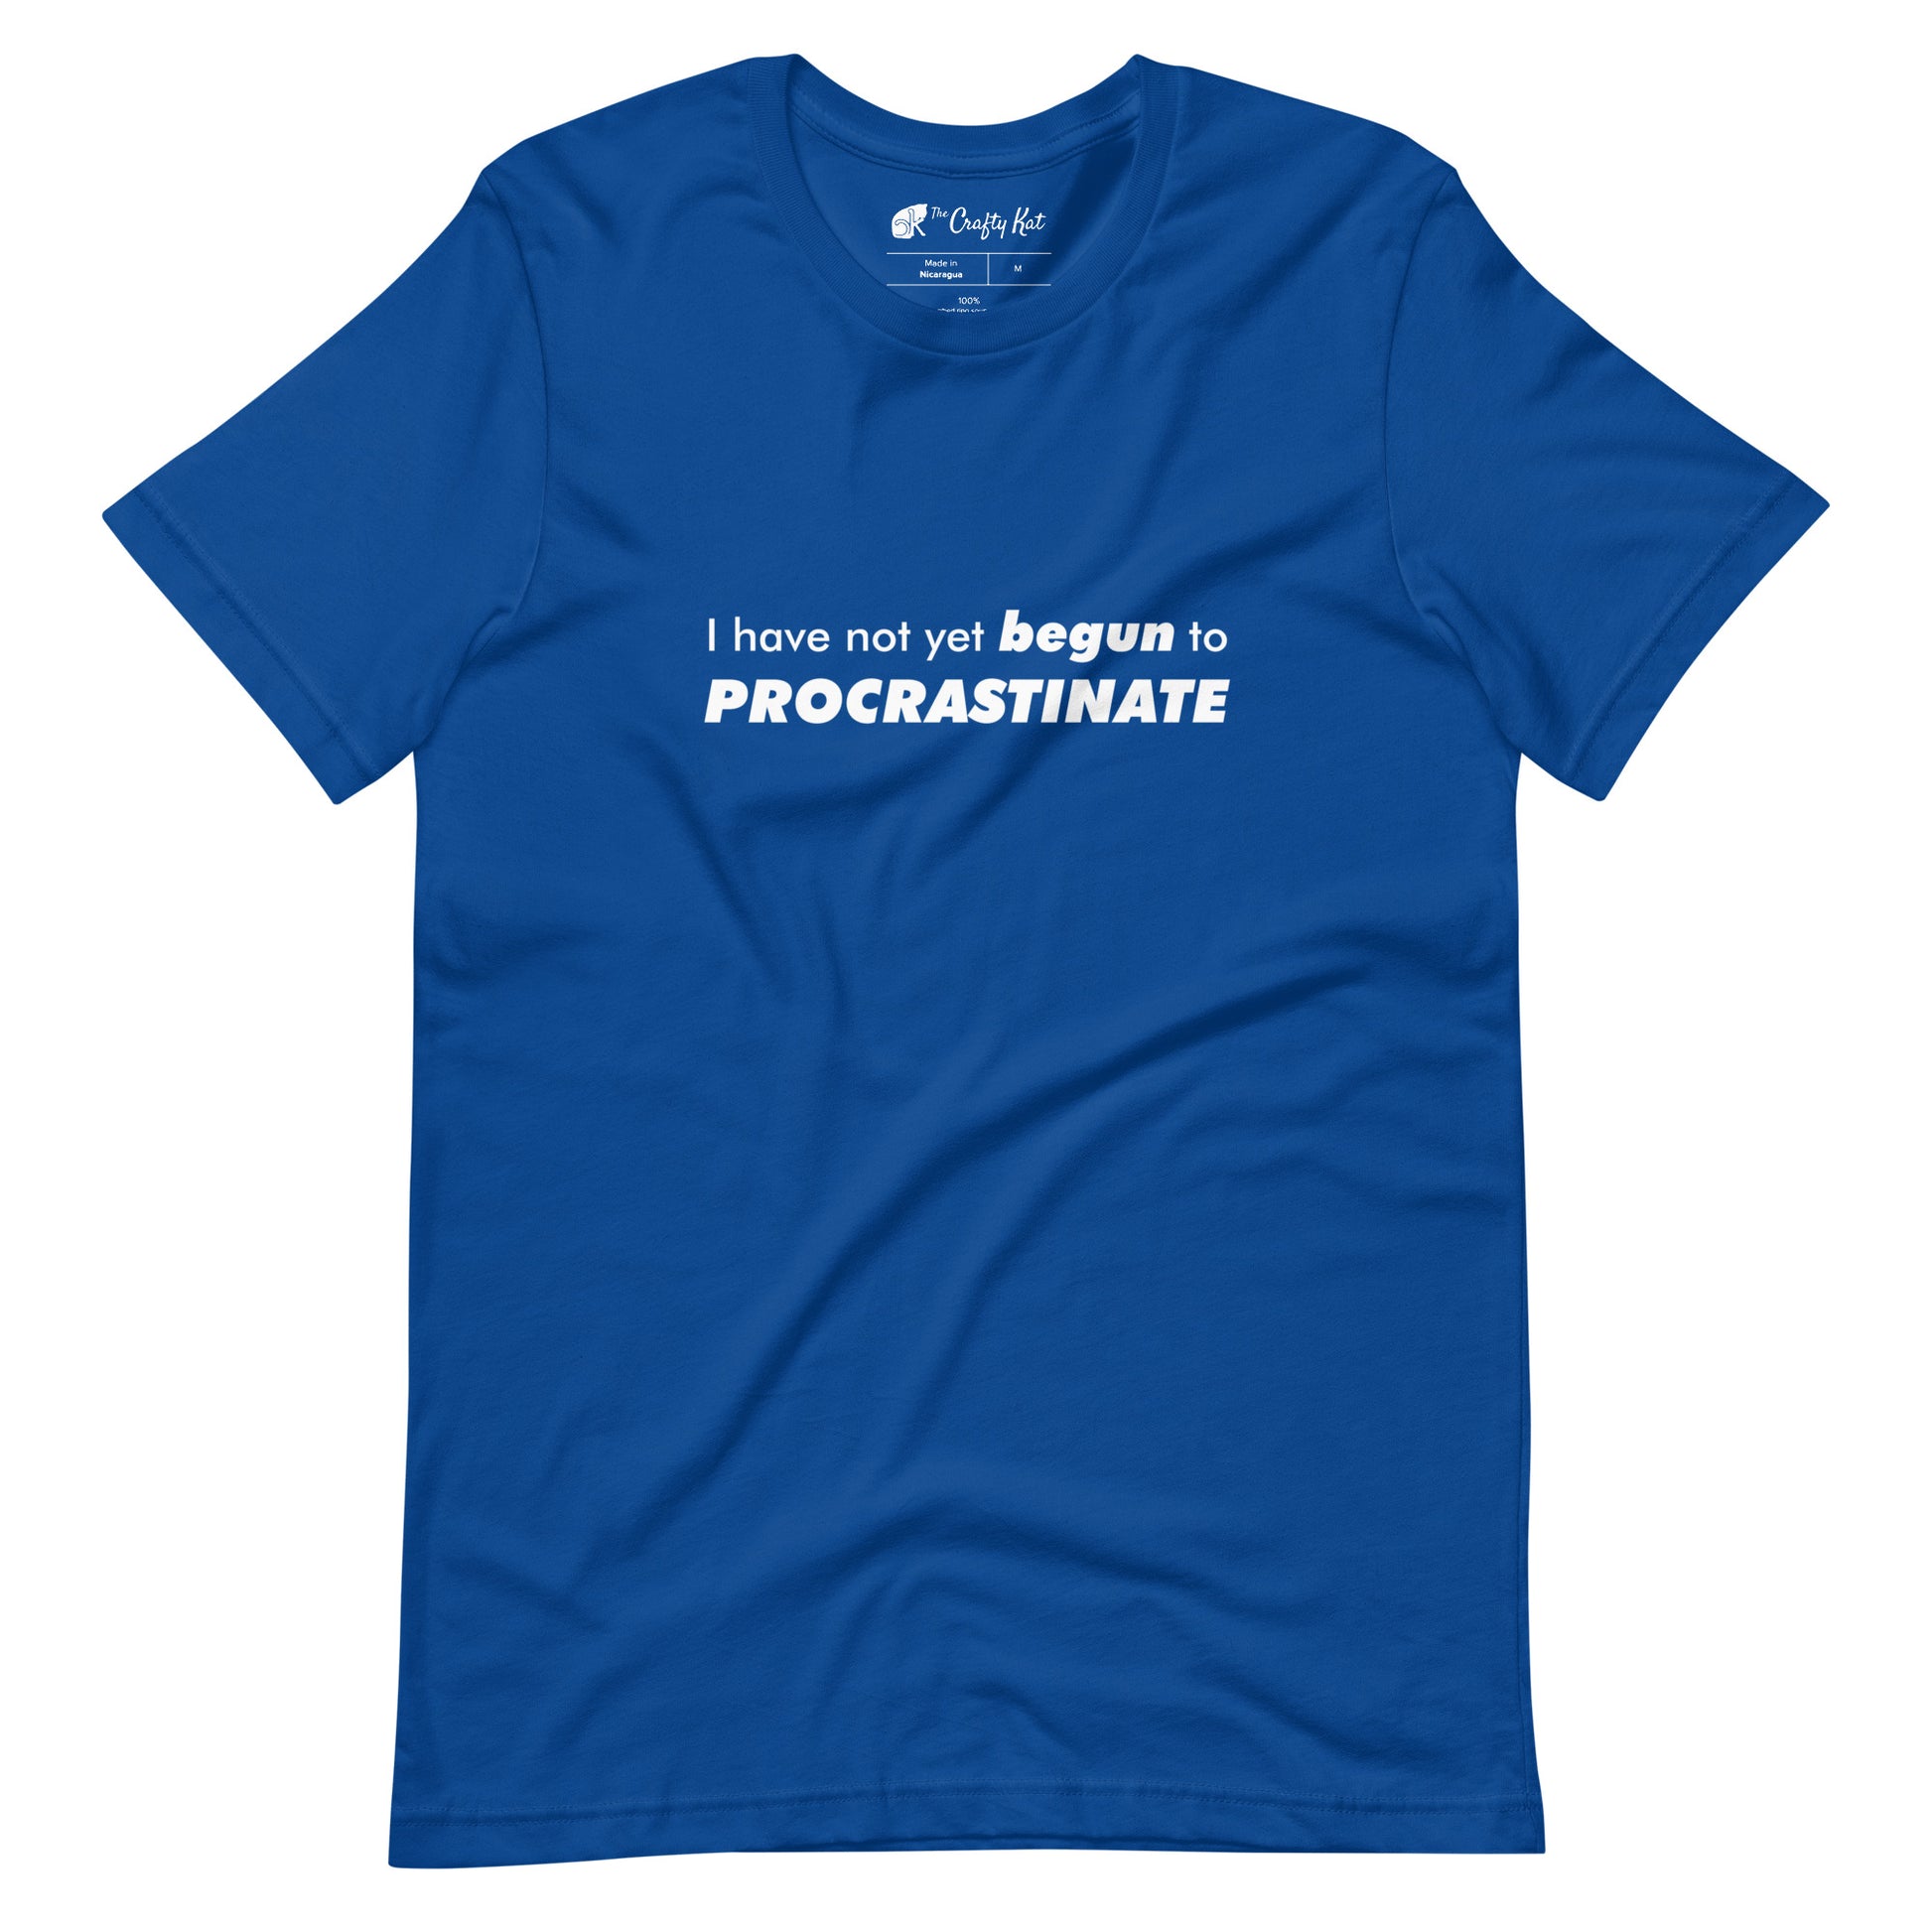 True Royal blue t-shirt with text graphic: "I have not yet BEGUN to PROCRASTINATE"